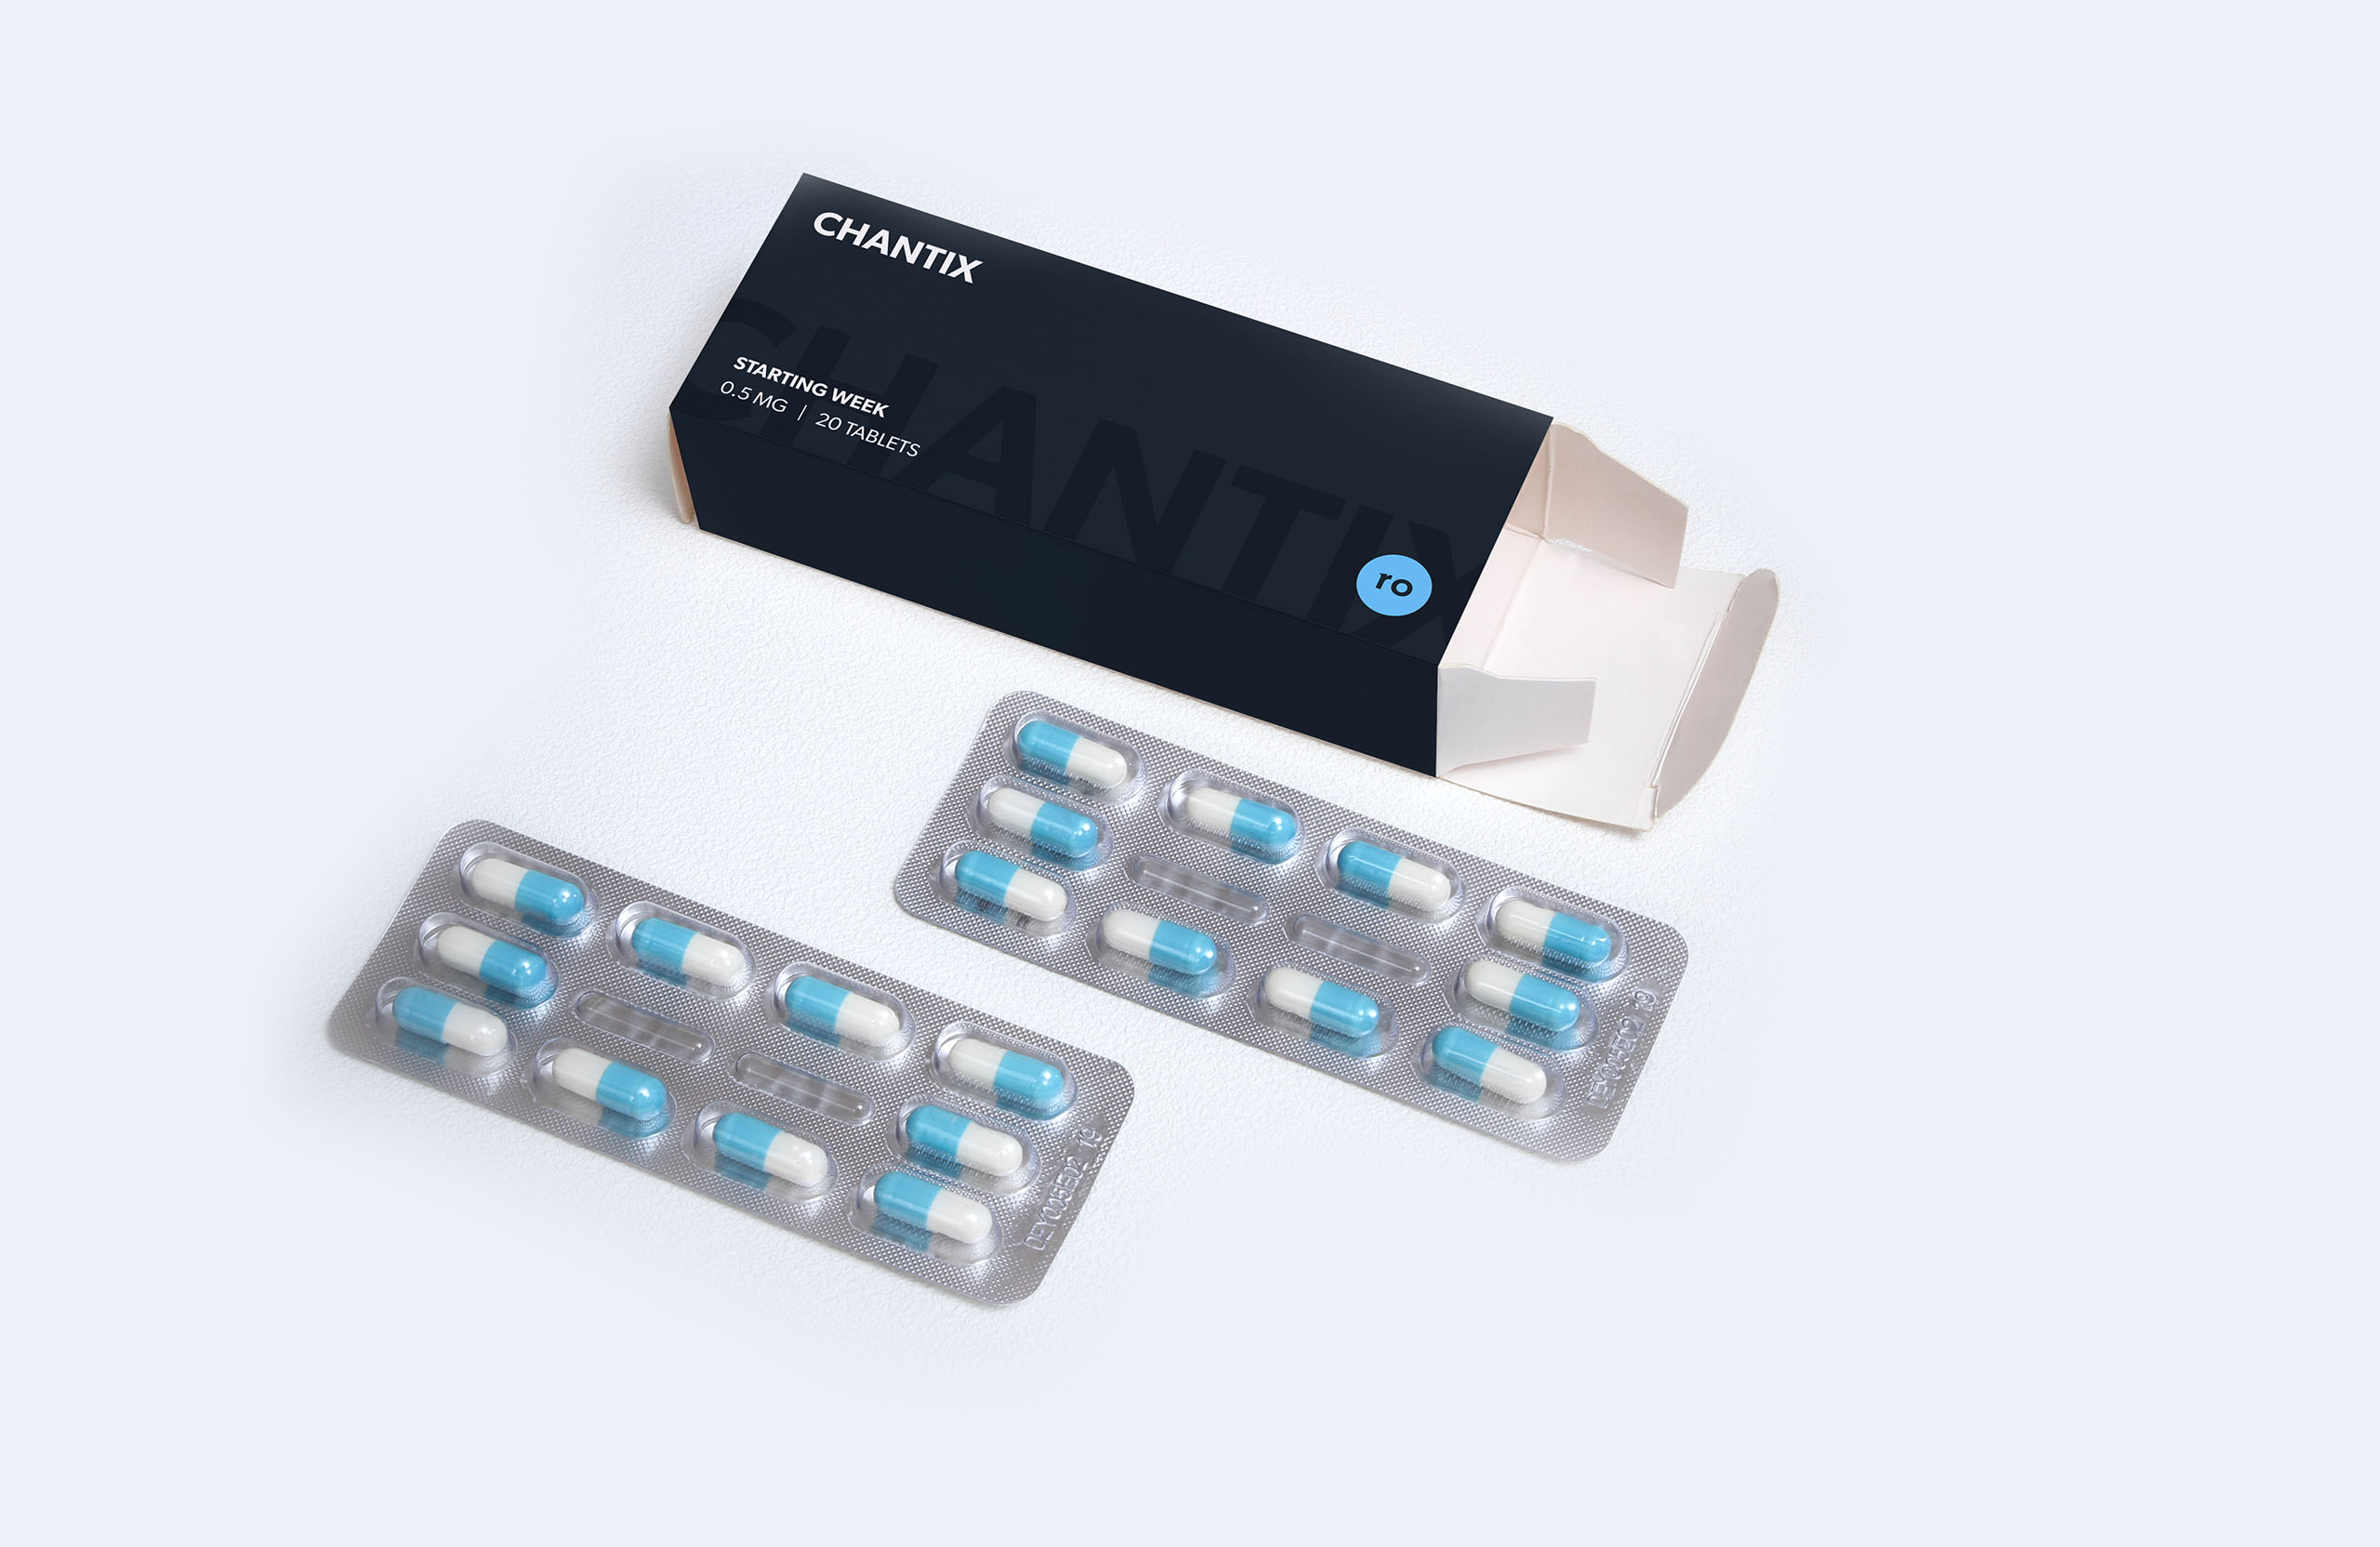 Pharmaceutical-Madicine-Packaging-Mock-up-PSD-2